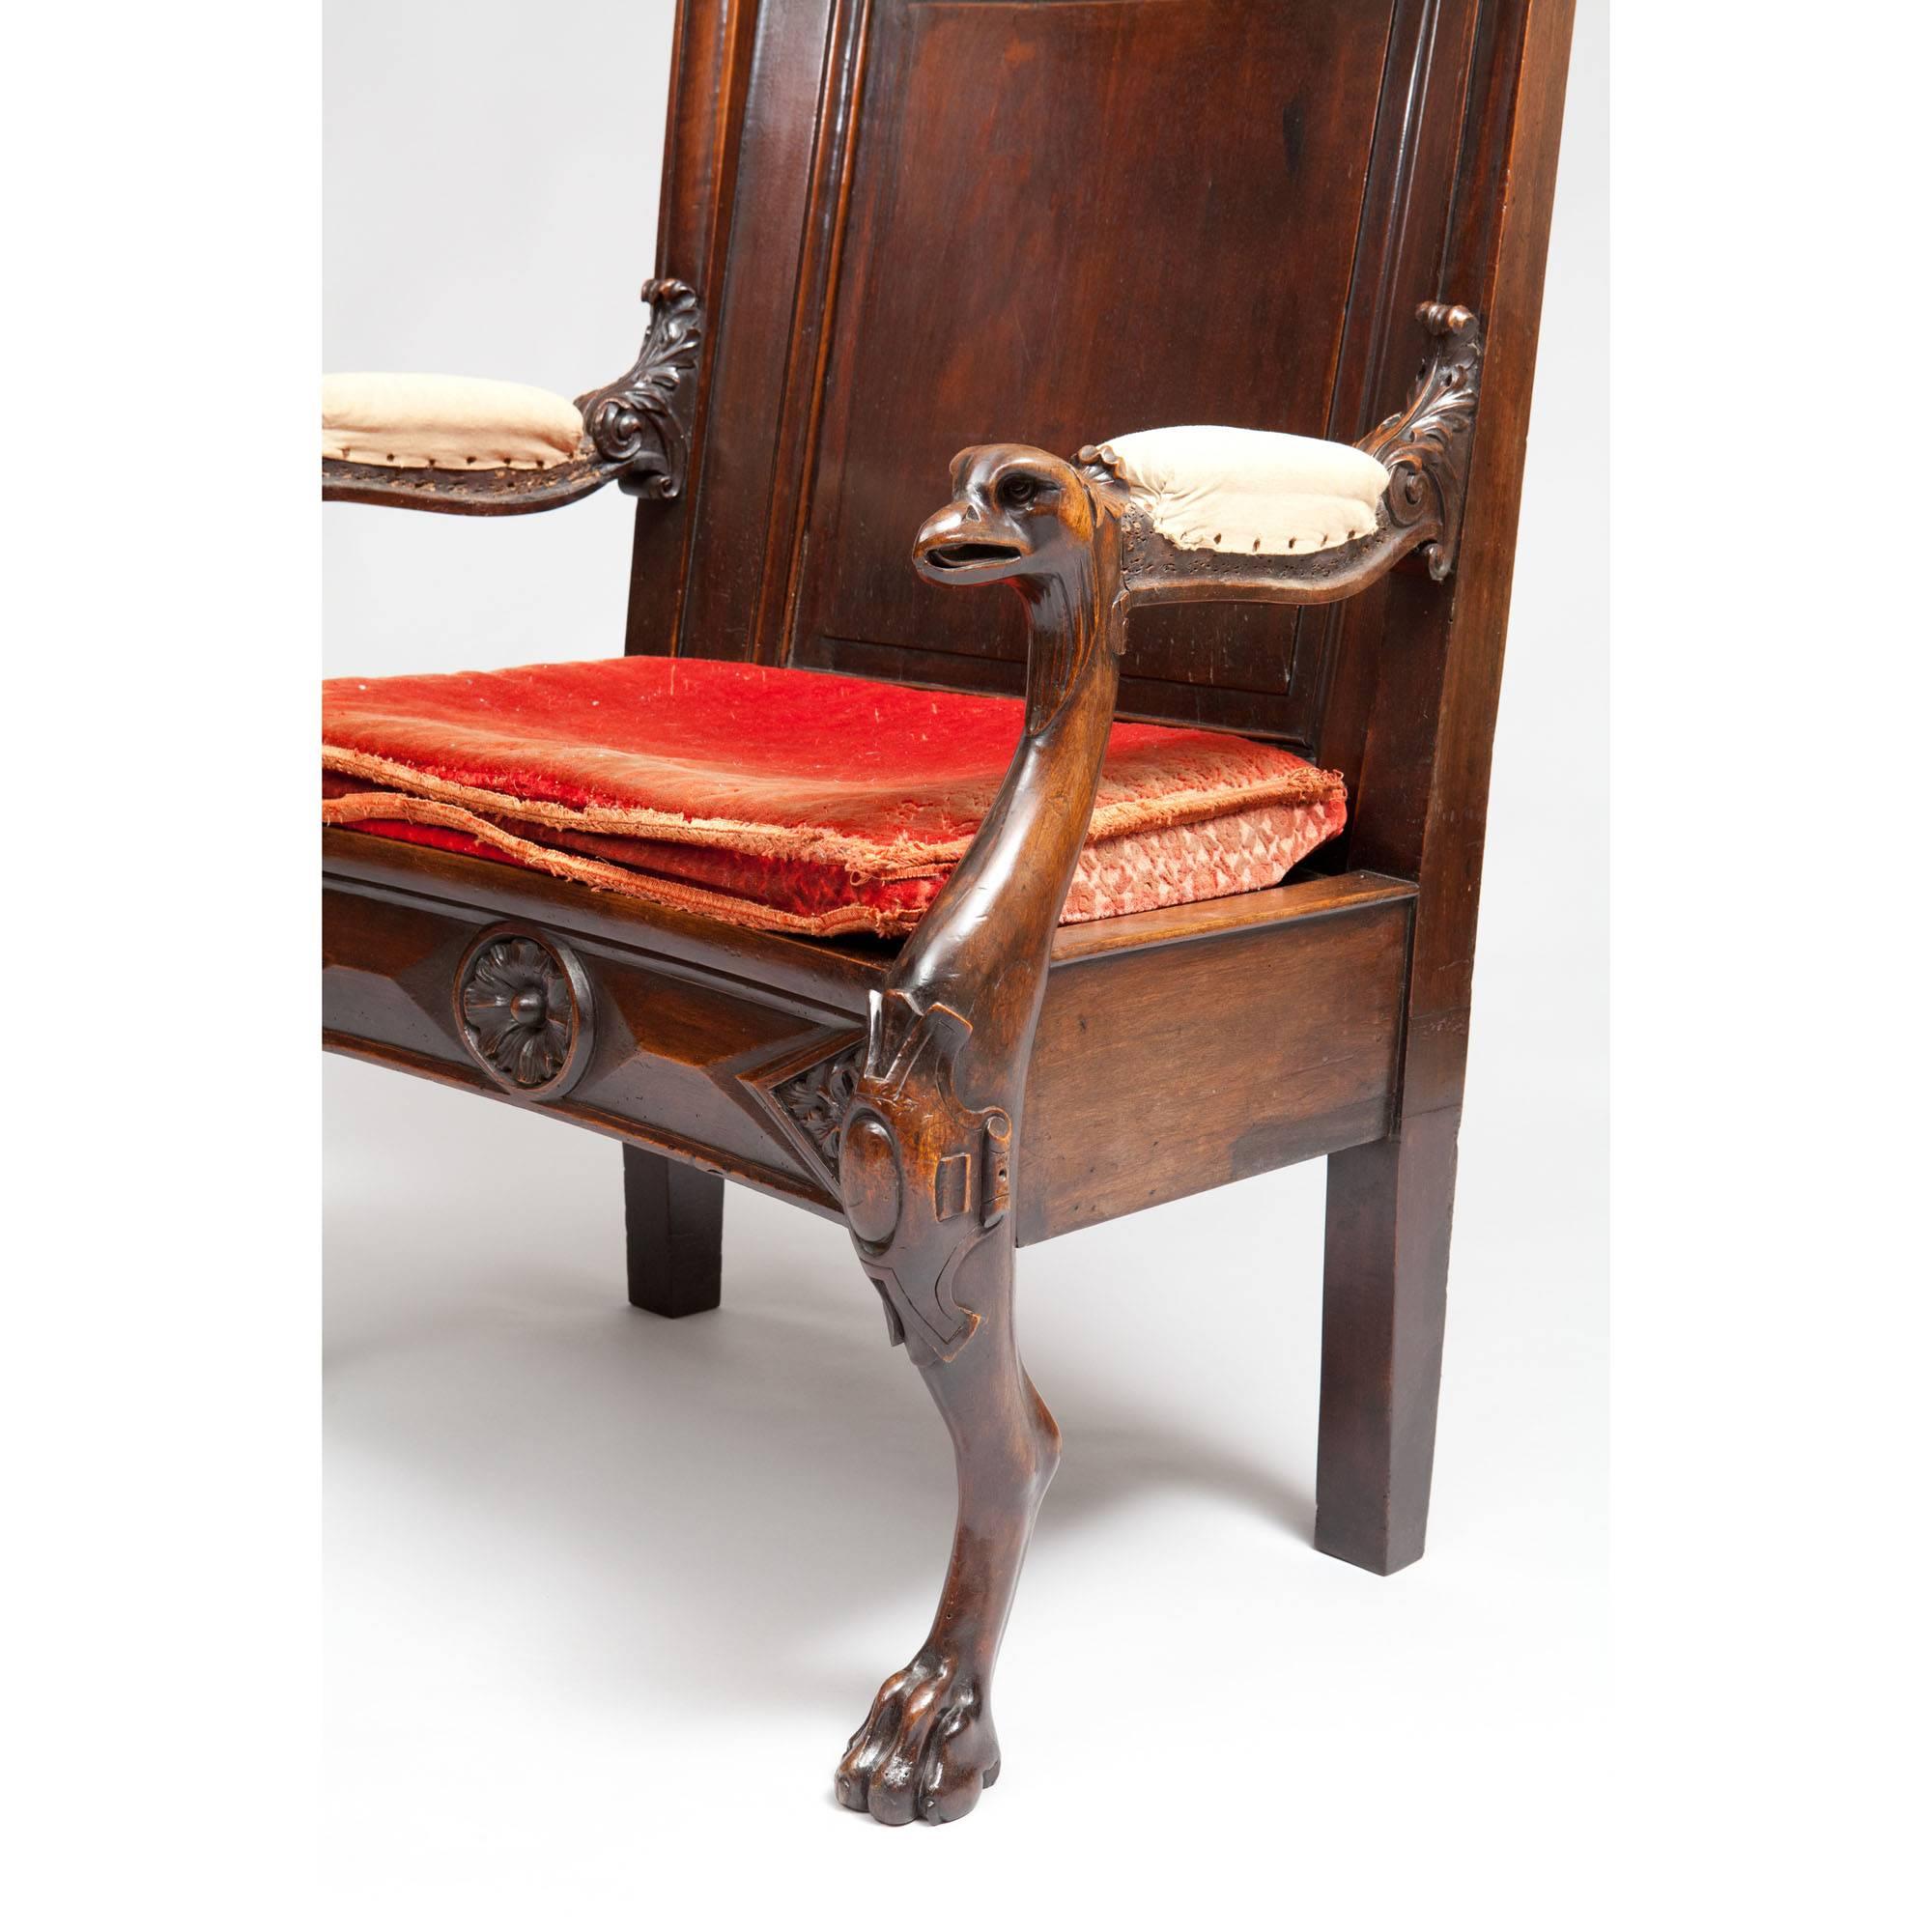 A substantial walnut throne chair, the curved back with arms terminating in eagle heads, the whole raised on zoomorphic legs terminating in lions paws.

Measures: H 41.5,
W 30,
depth of seat 17,
height of seat 19 including cushion.